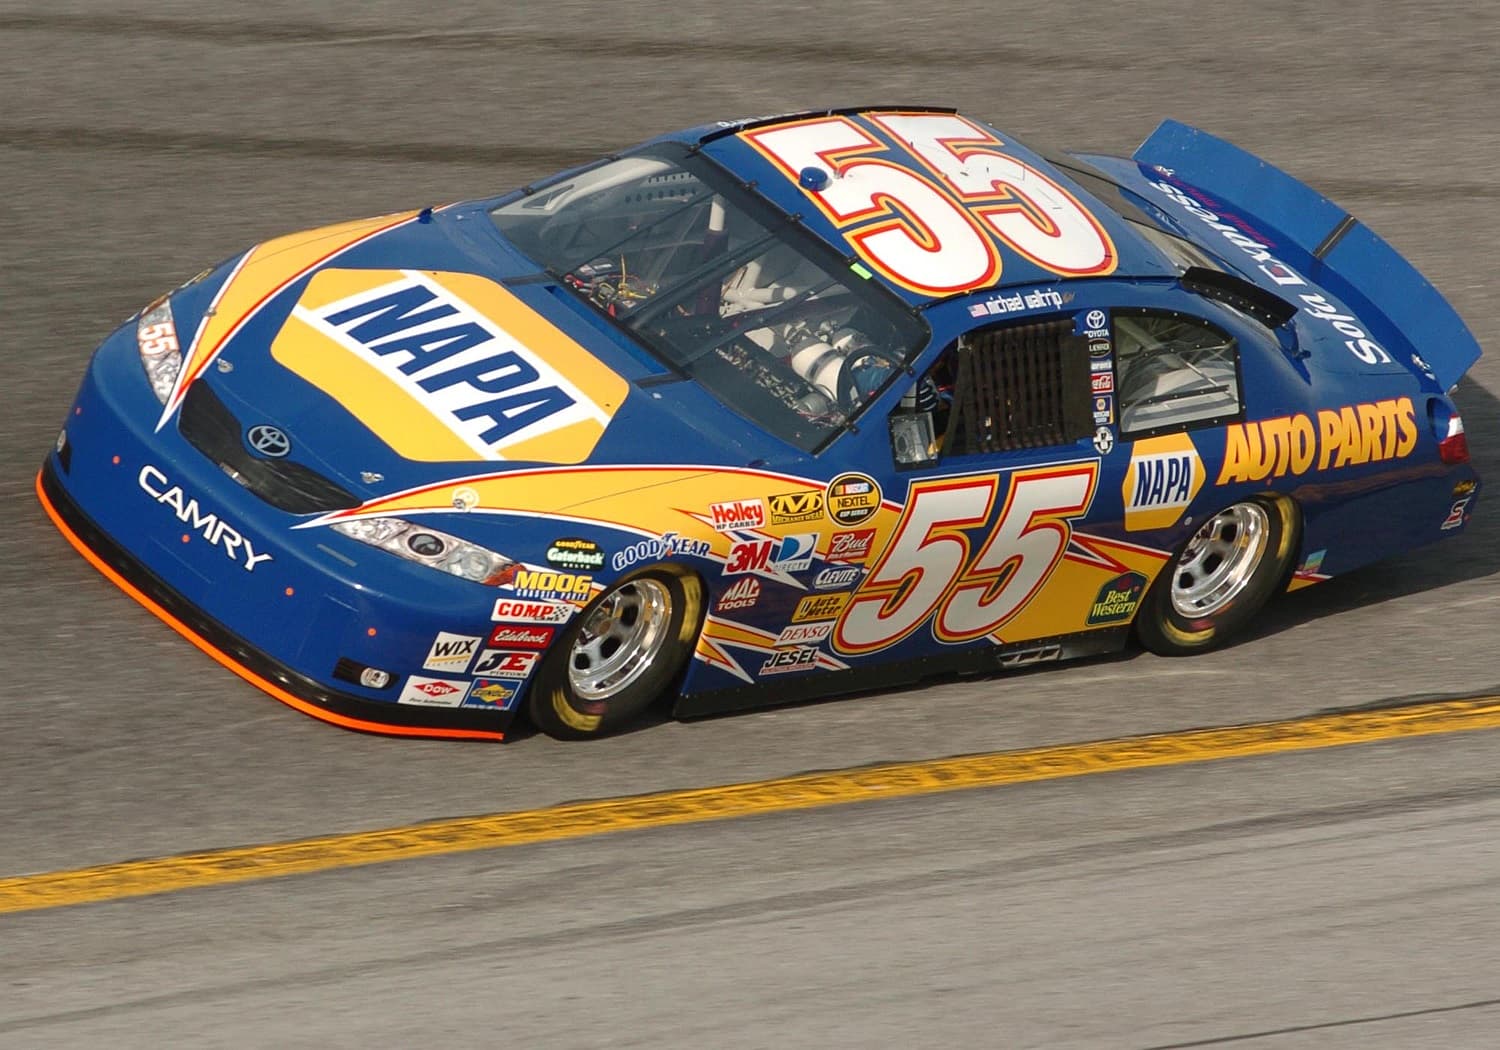 Michael Waltrip drives the NAPA Auto Parts Toyota car during qualifying for the 2007 Daytona 500 | Stephen M. Dowell/Orlando Sentinel/Tribune News Service via Getty Images